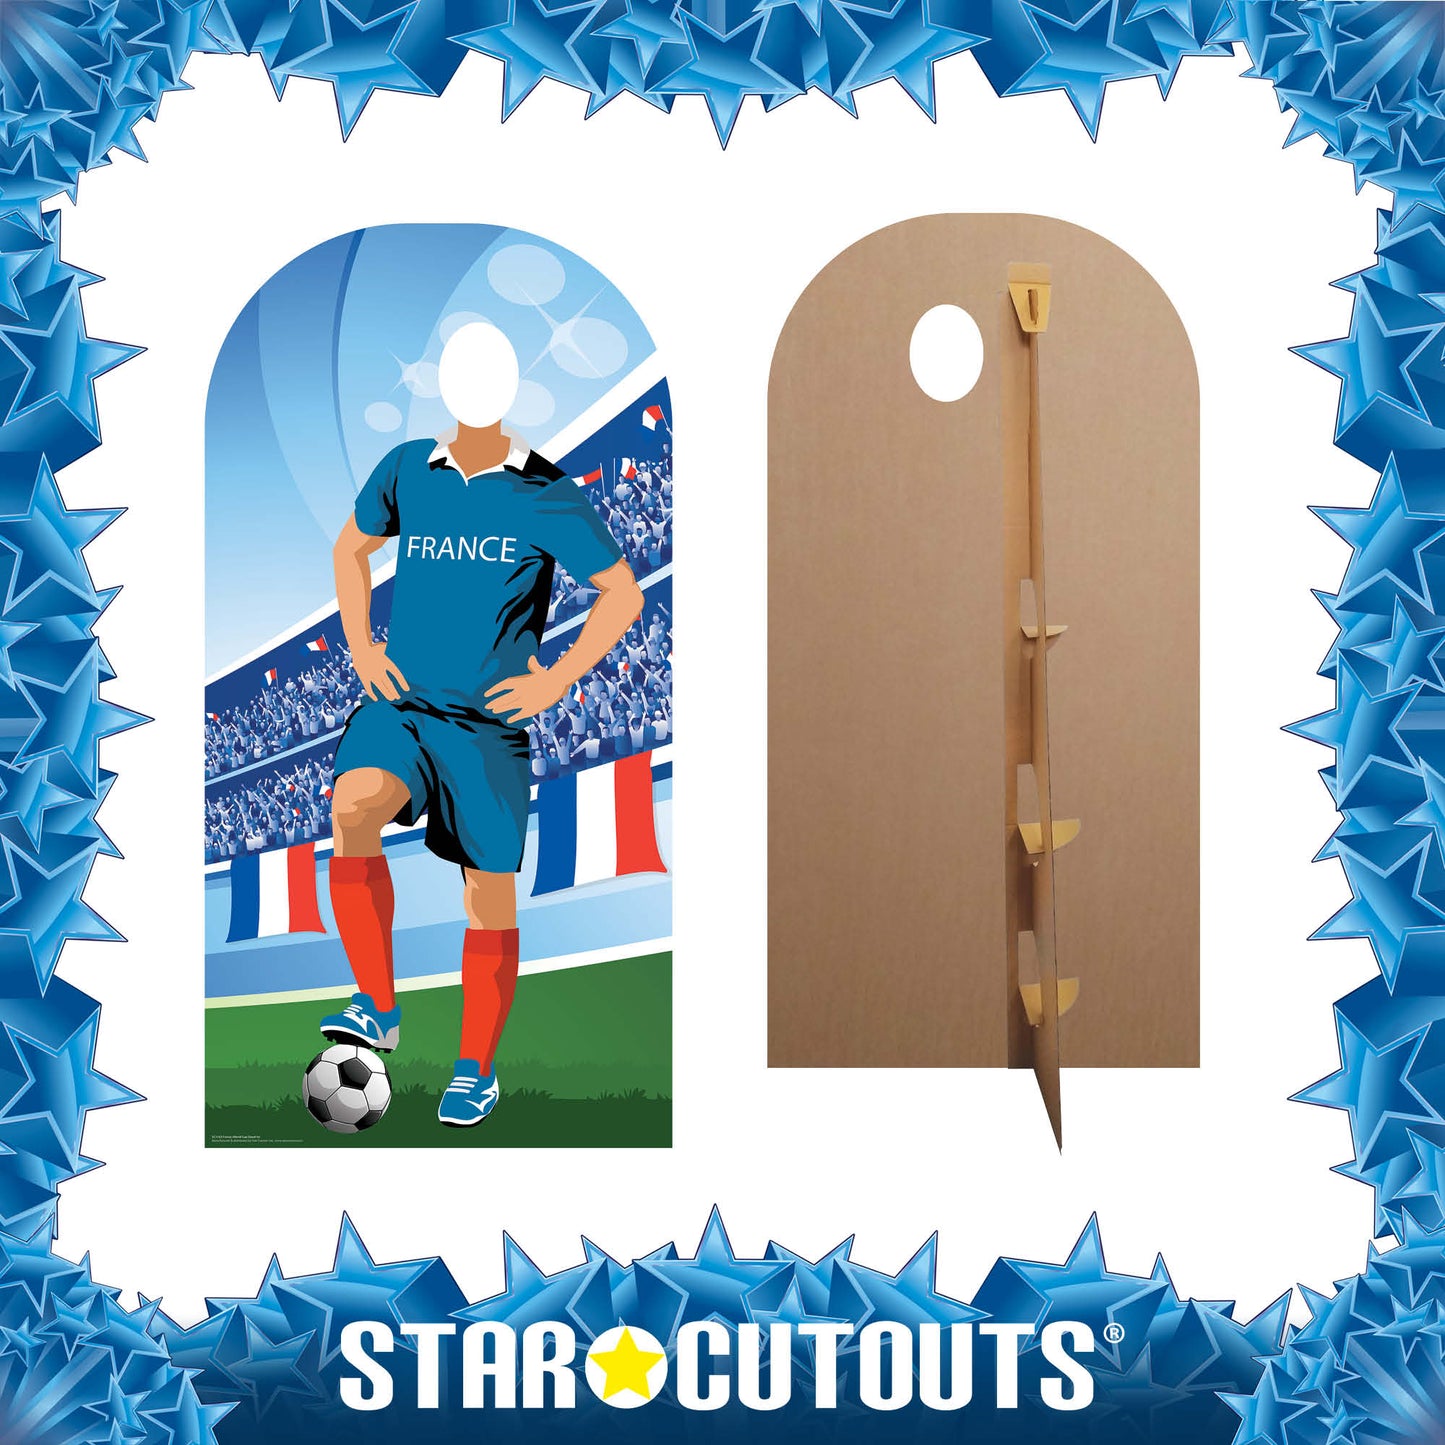 France World Tournament Football Stand-IN Cardboard Cutout